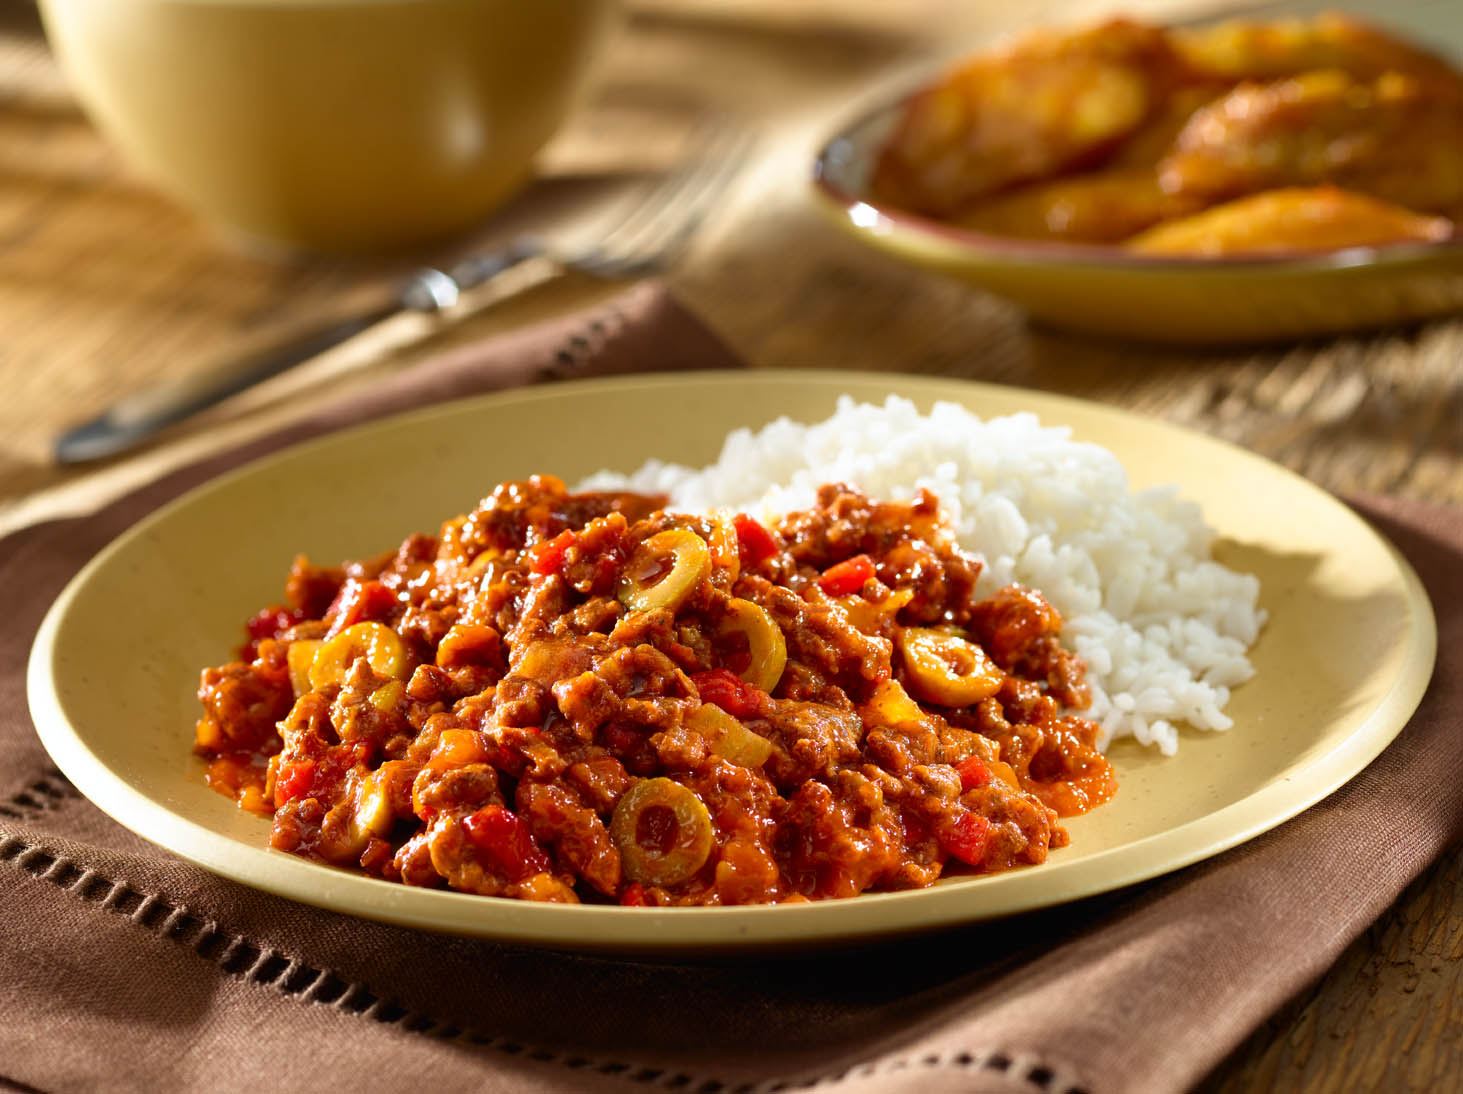 Picadillo – Spiced Ground Meat